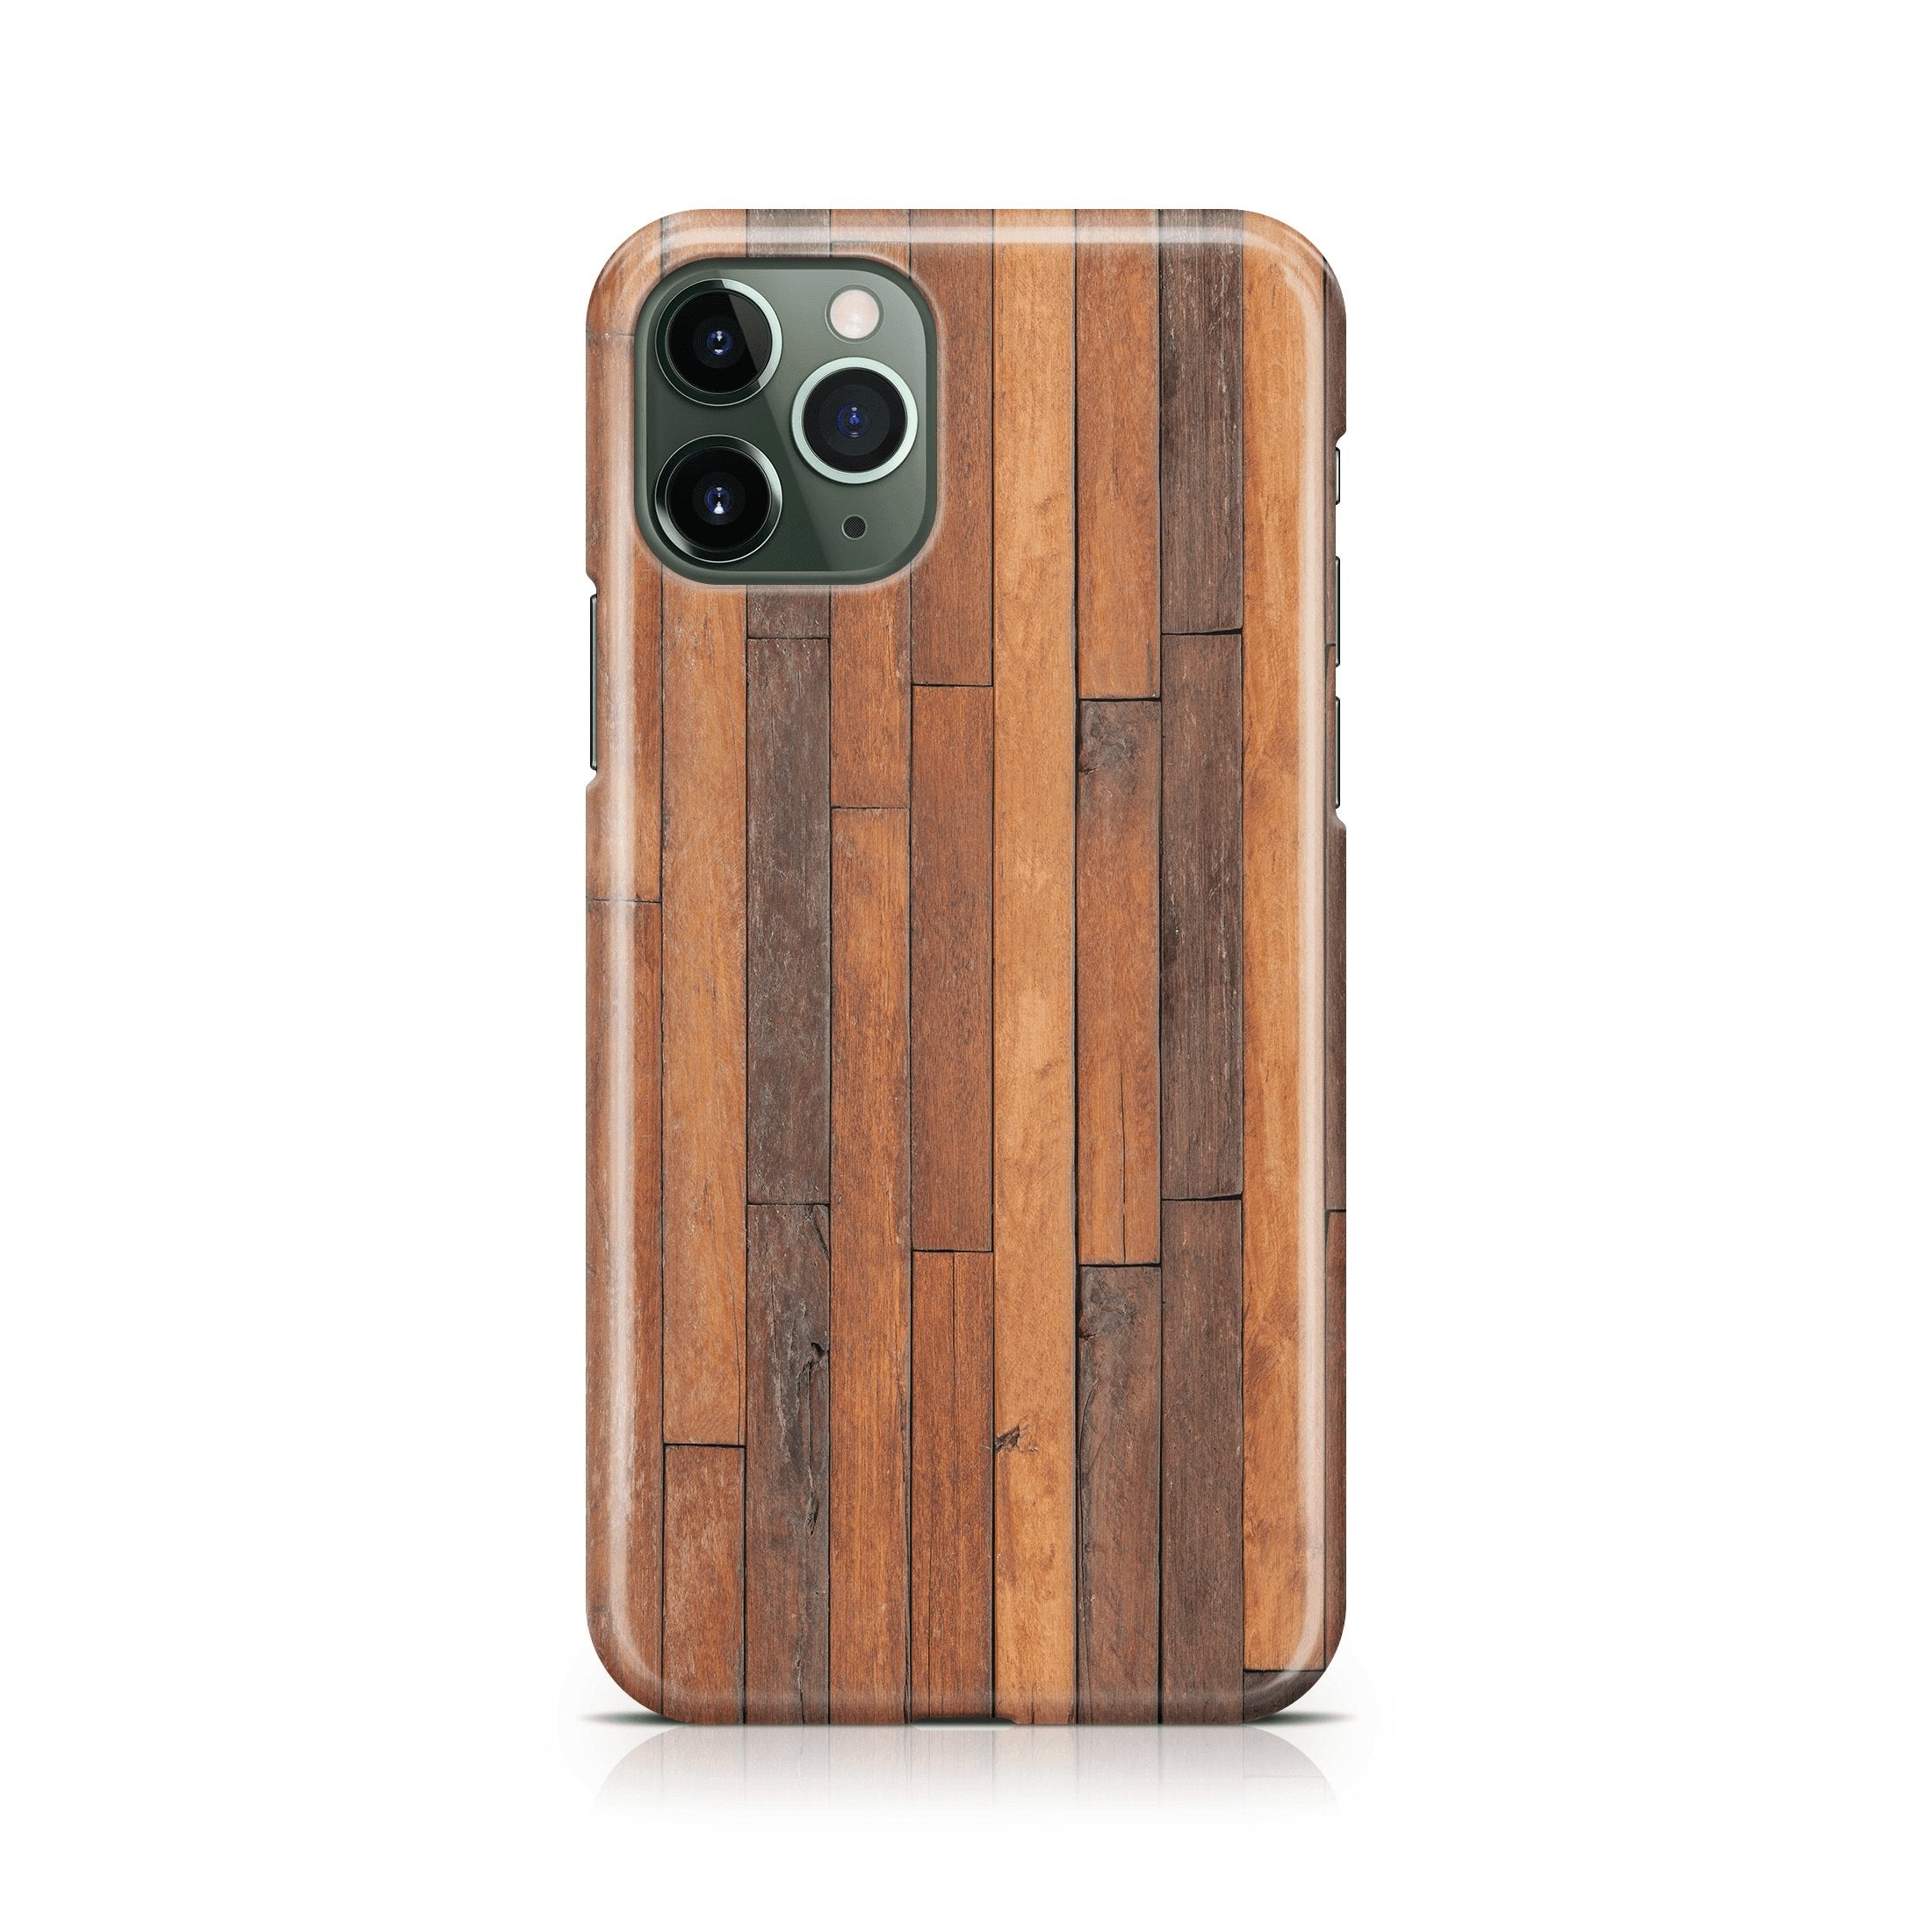 Rustic Steps - iPhone phone case designs by CaseSwagger